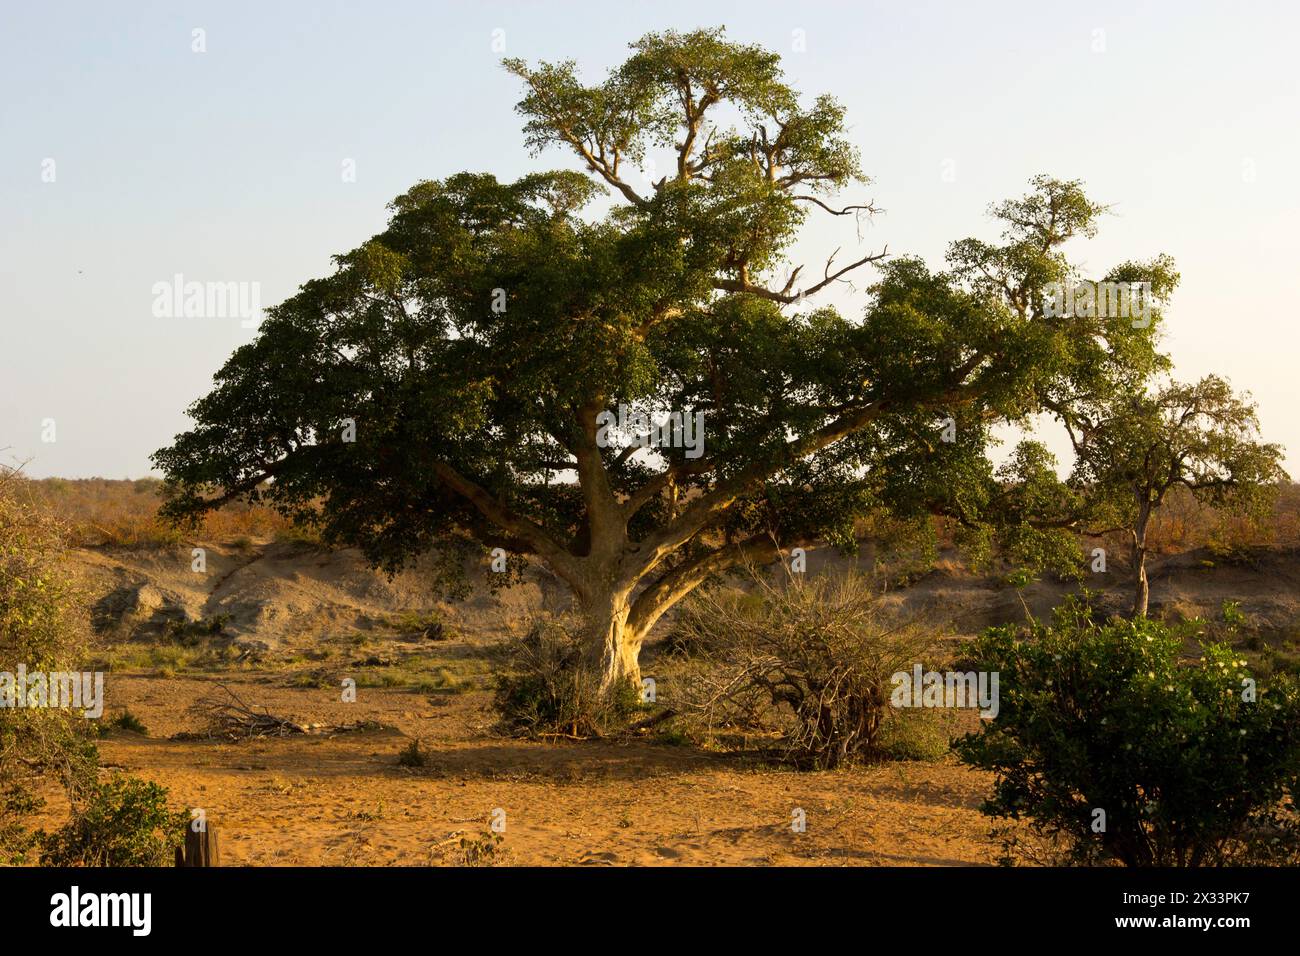 Scenery and landscapes of Southern Africa Stock Photo